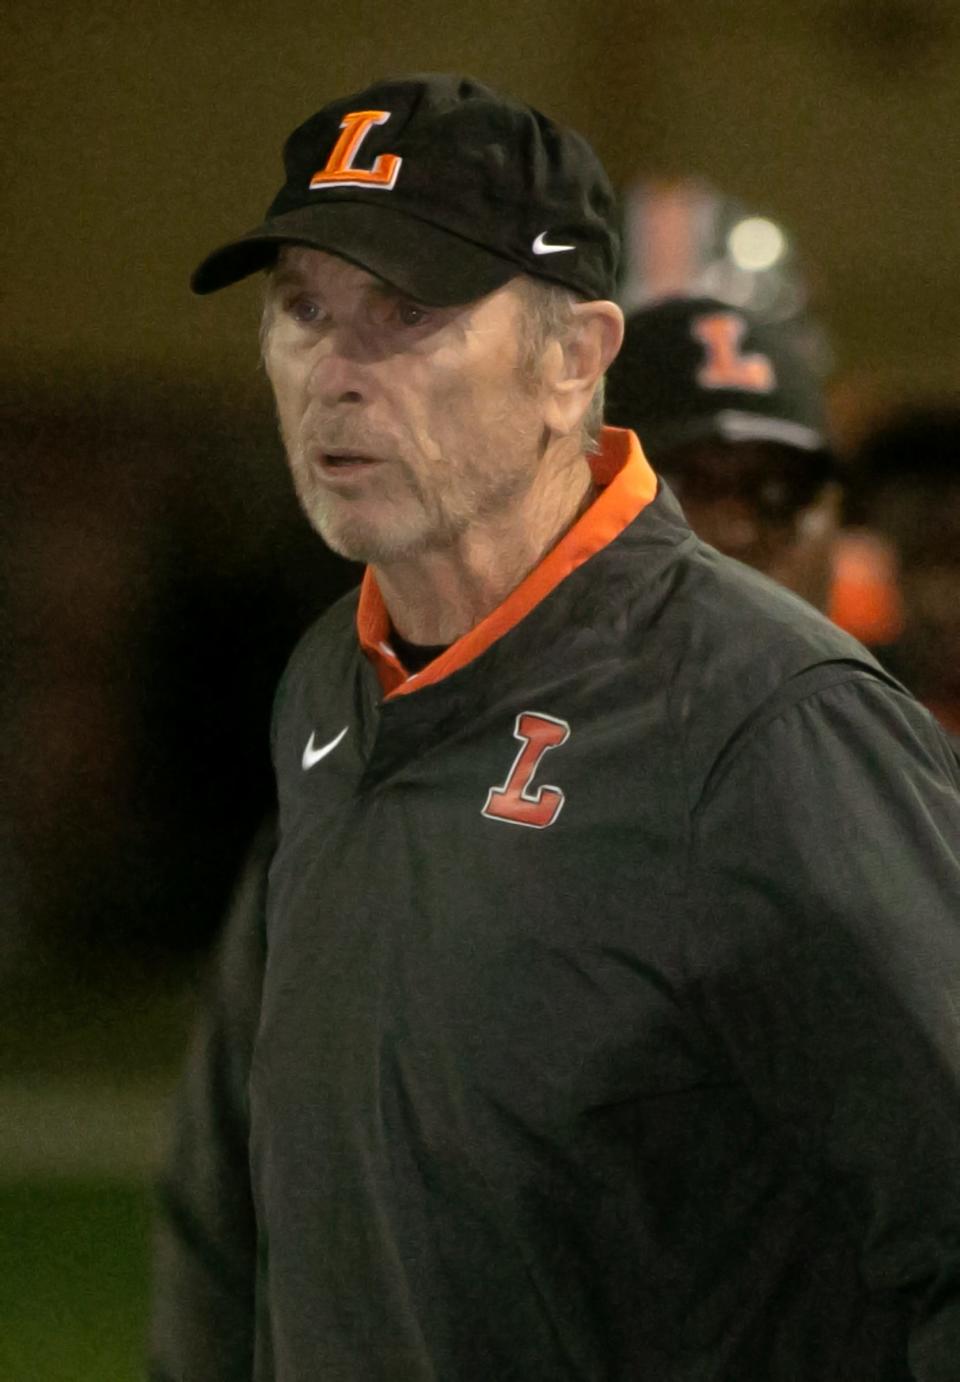 Bill Castle has decided to retire after 47 season as the head football coach at Lakeland High. He has more wins than any coach in Florida high school football history, as well as eight state titles, the last of which was won in December.